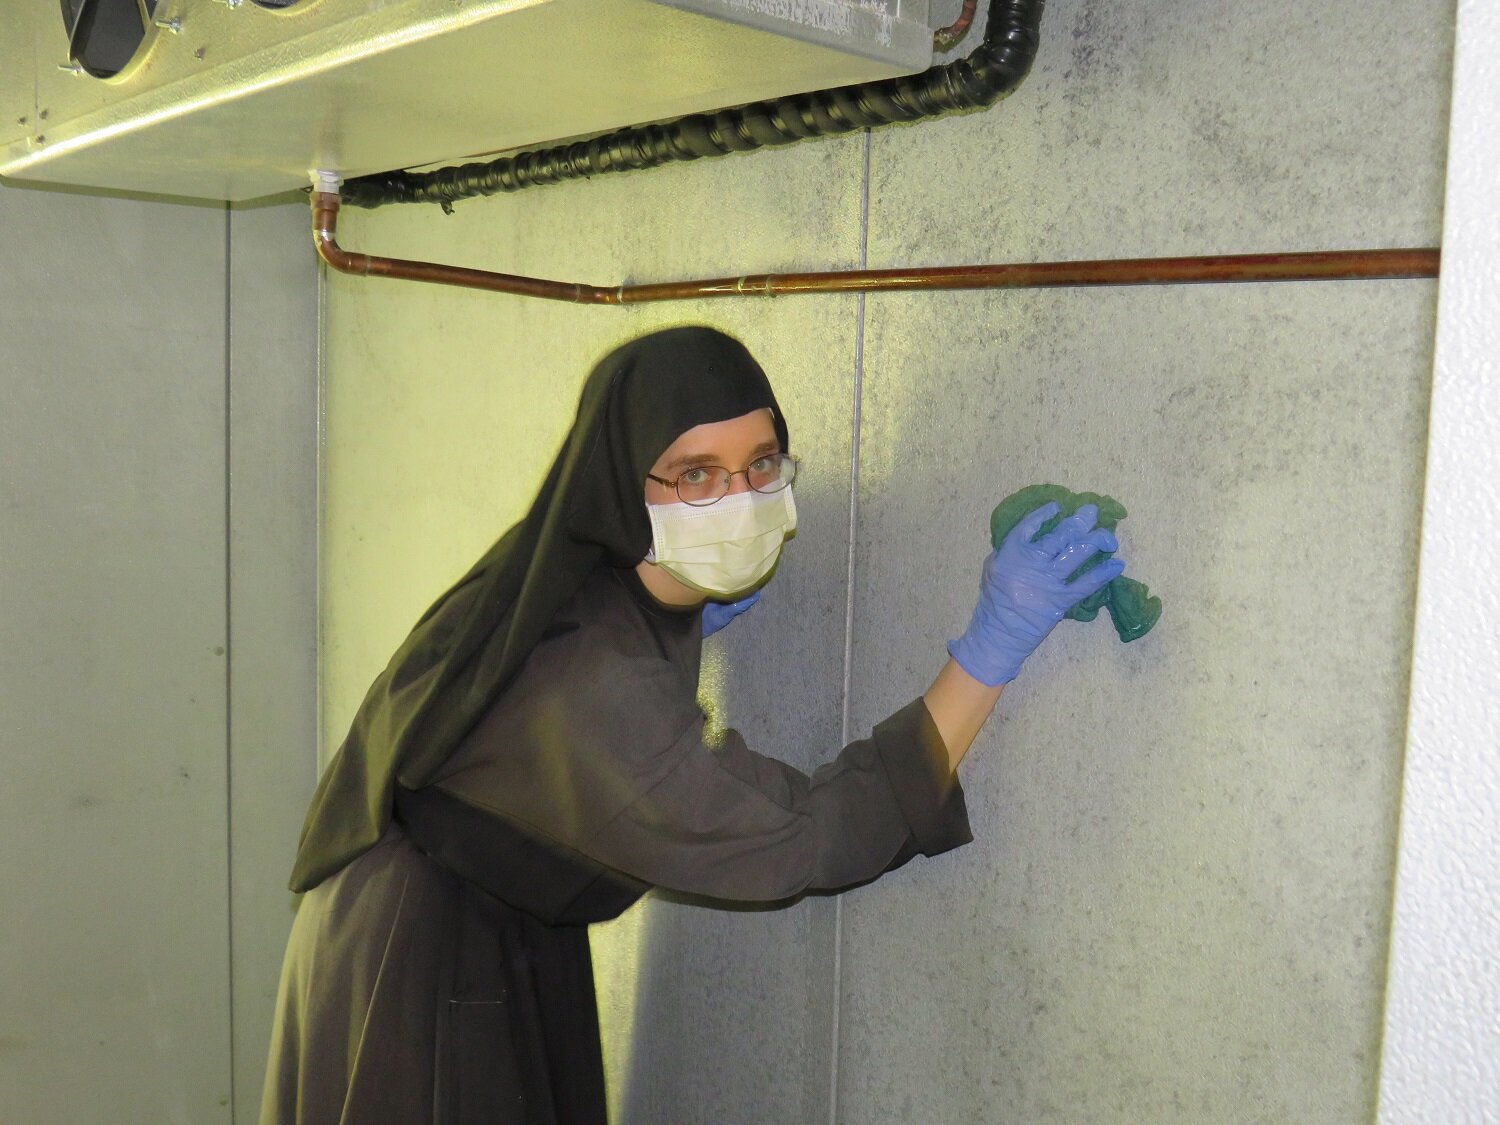  Sister Mary Andrea getting those walls squeaky-clean! 